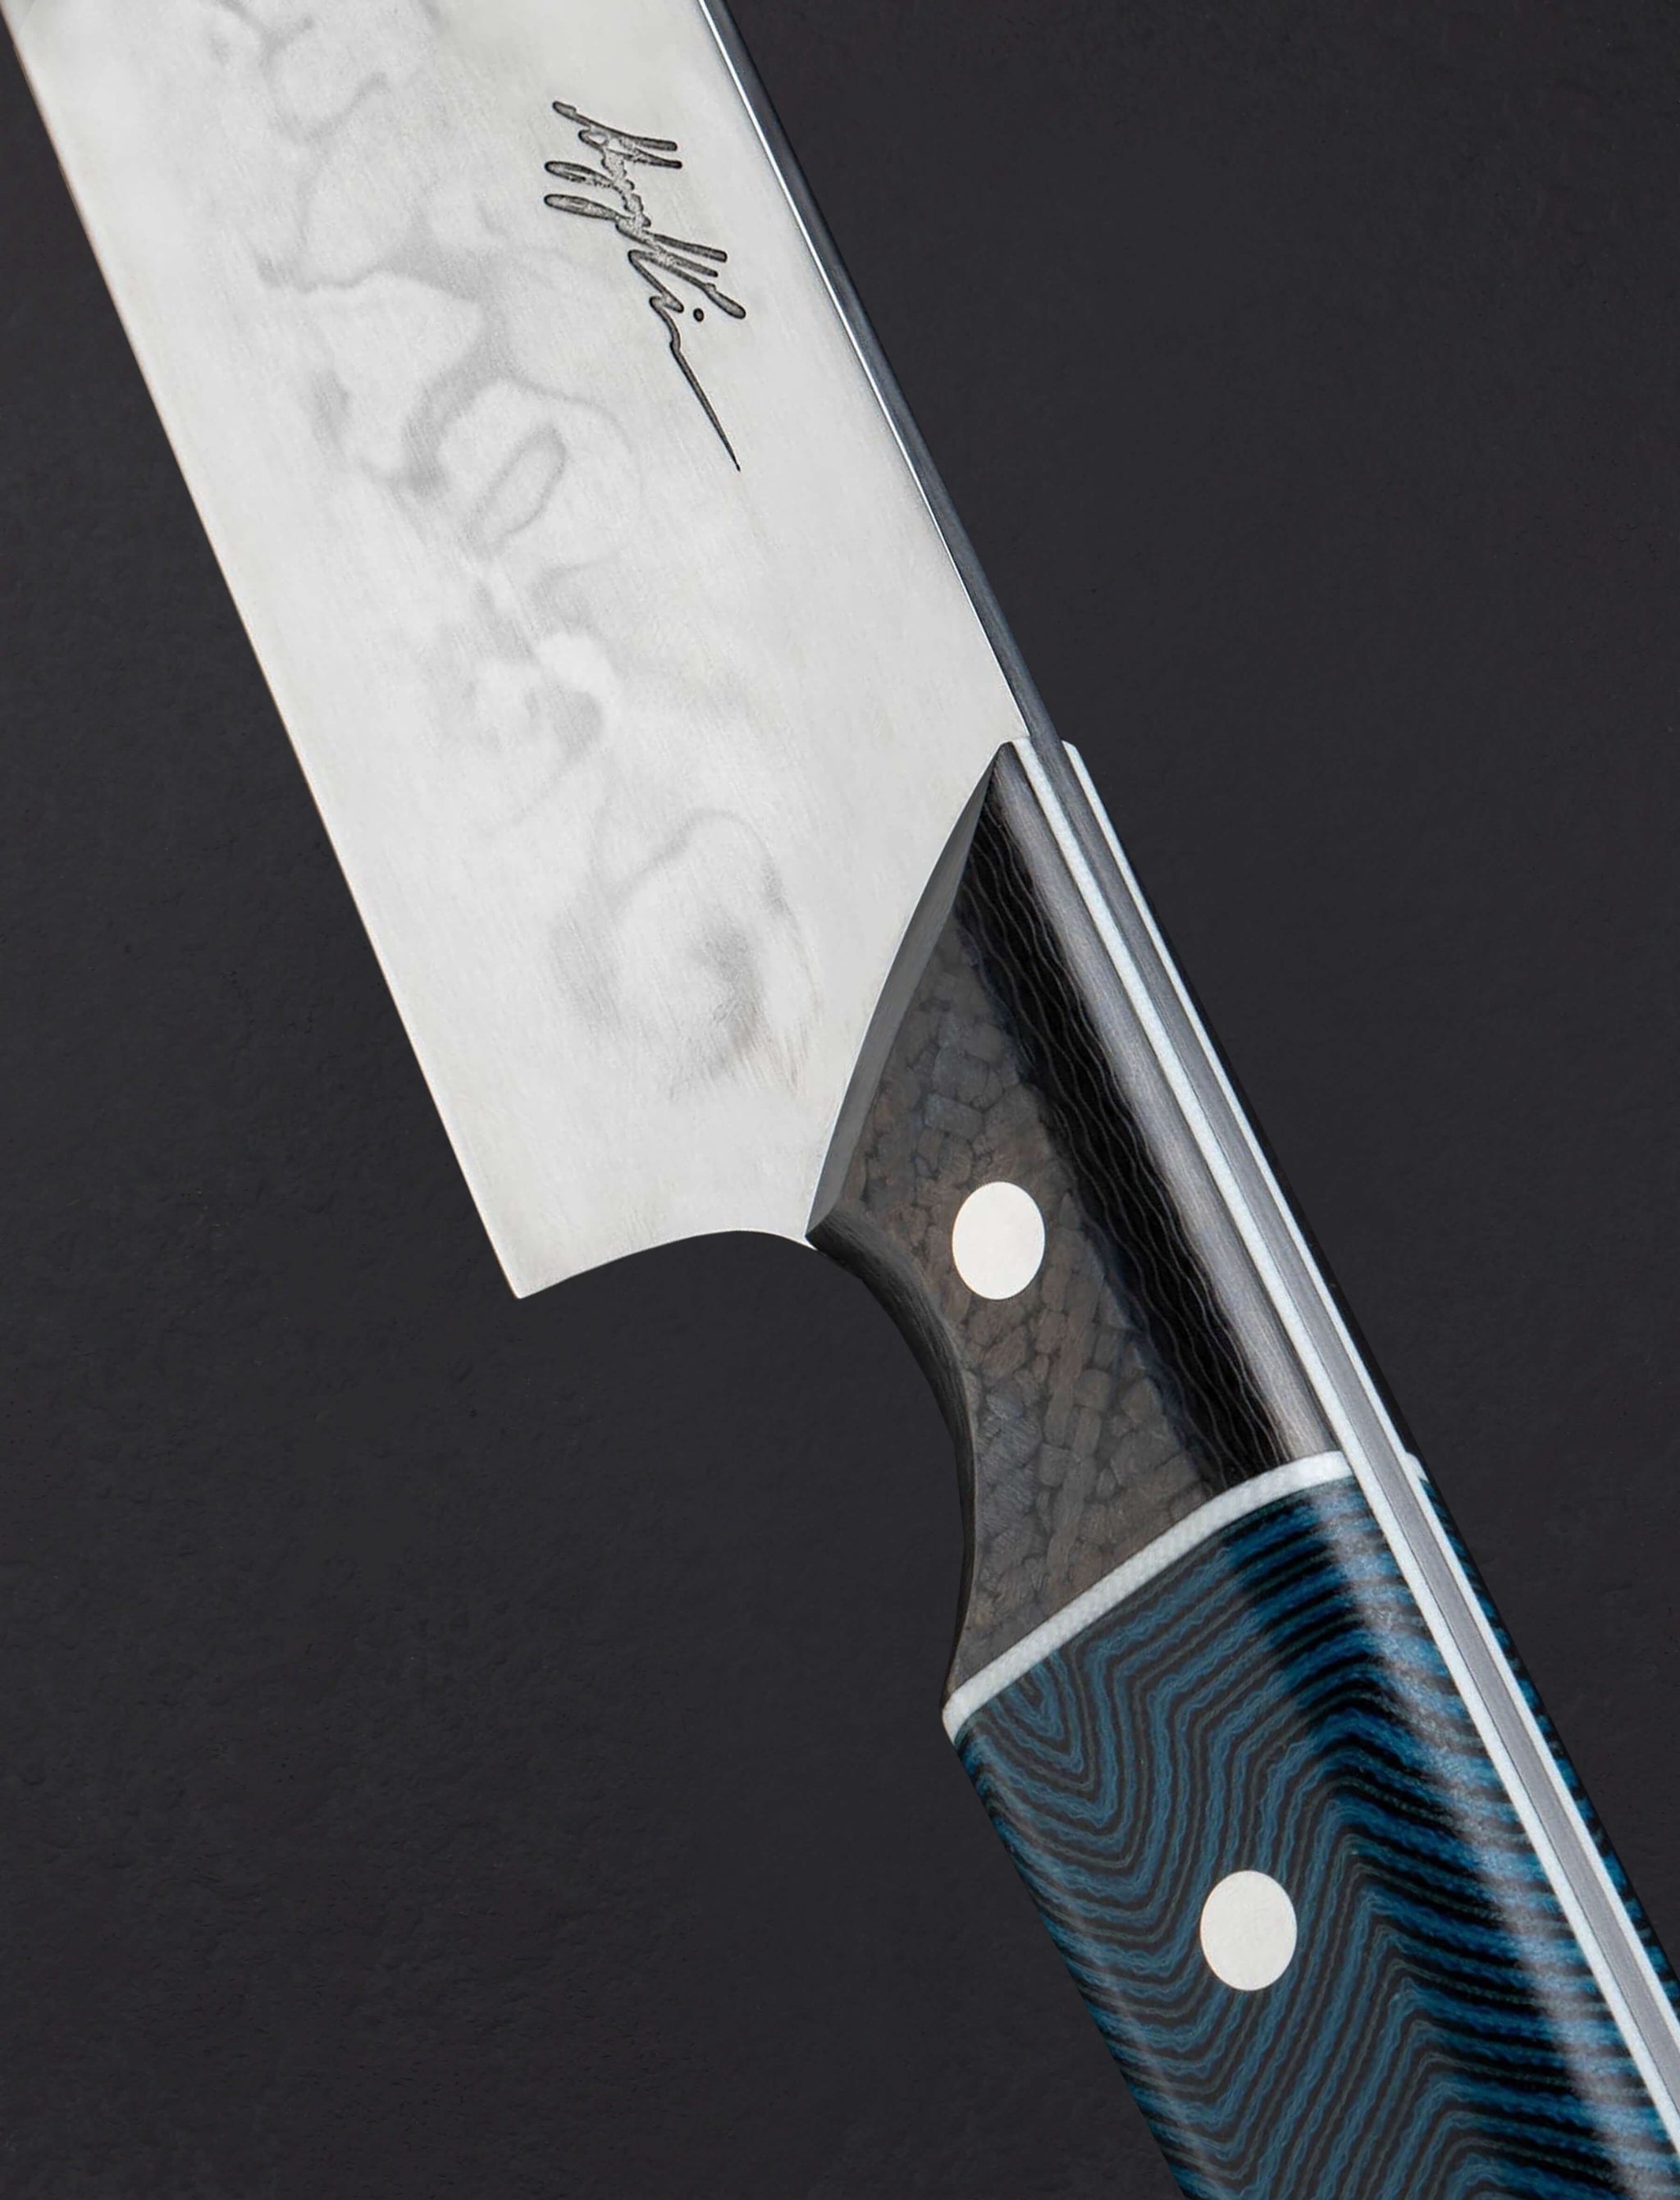 The finest japanese knives for bluefin tuna - Fuentes